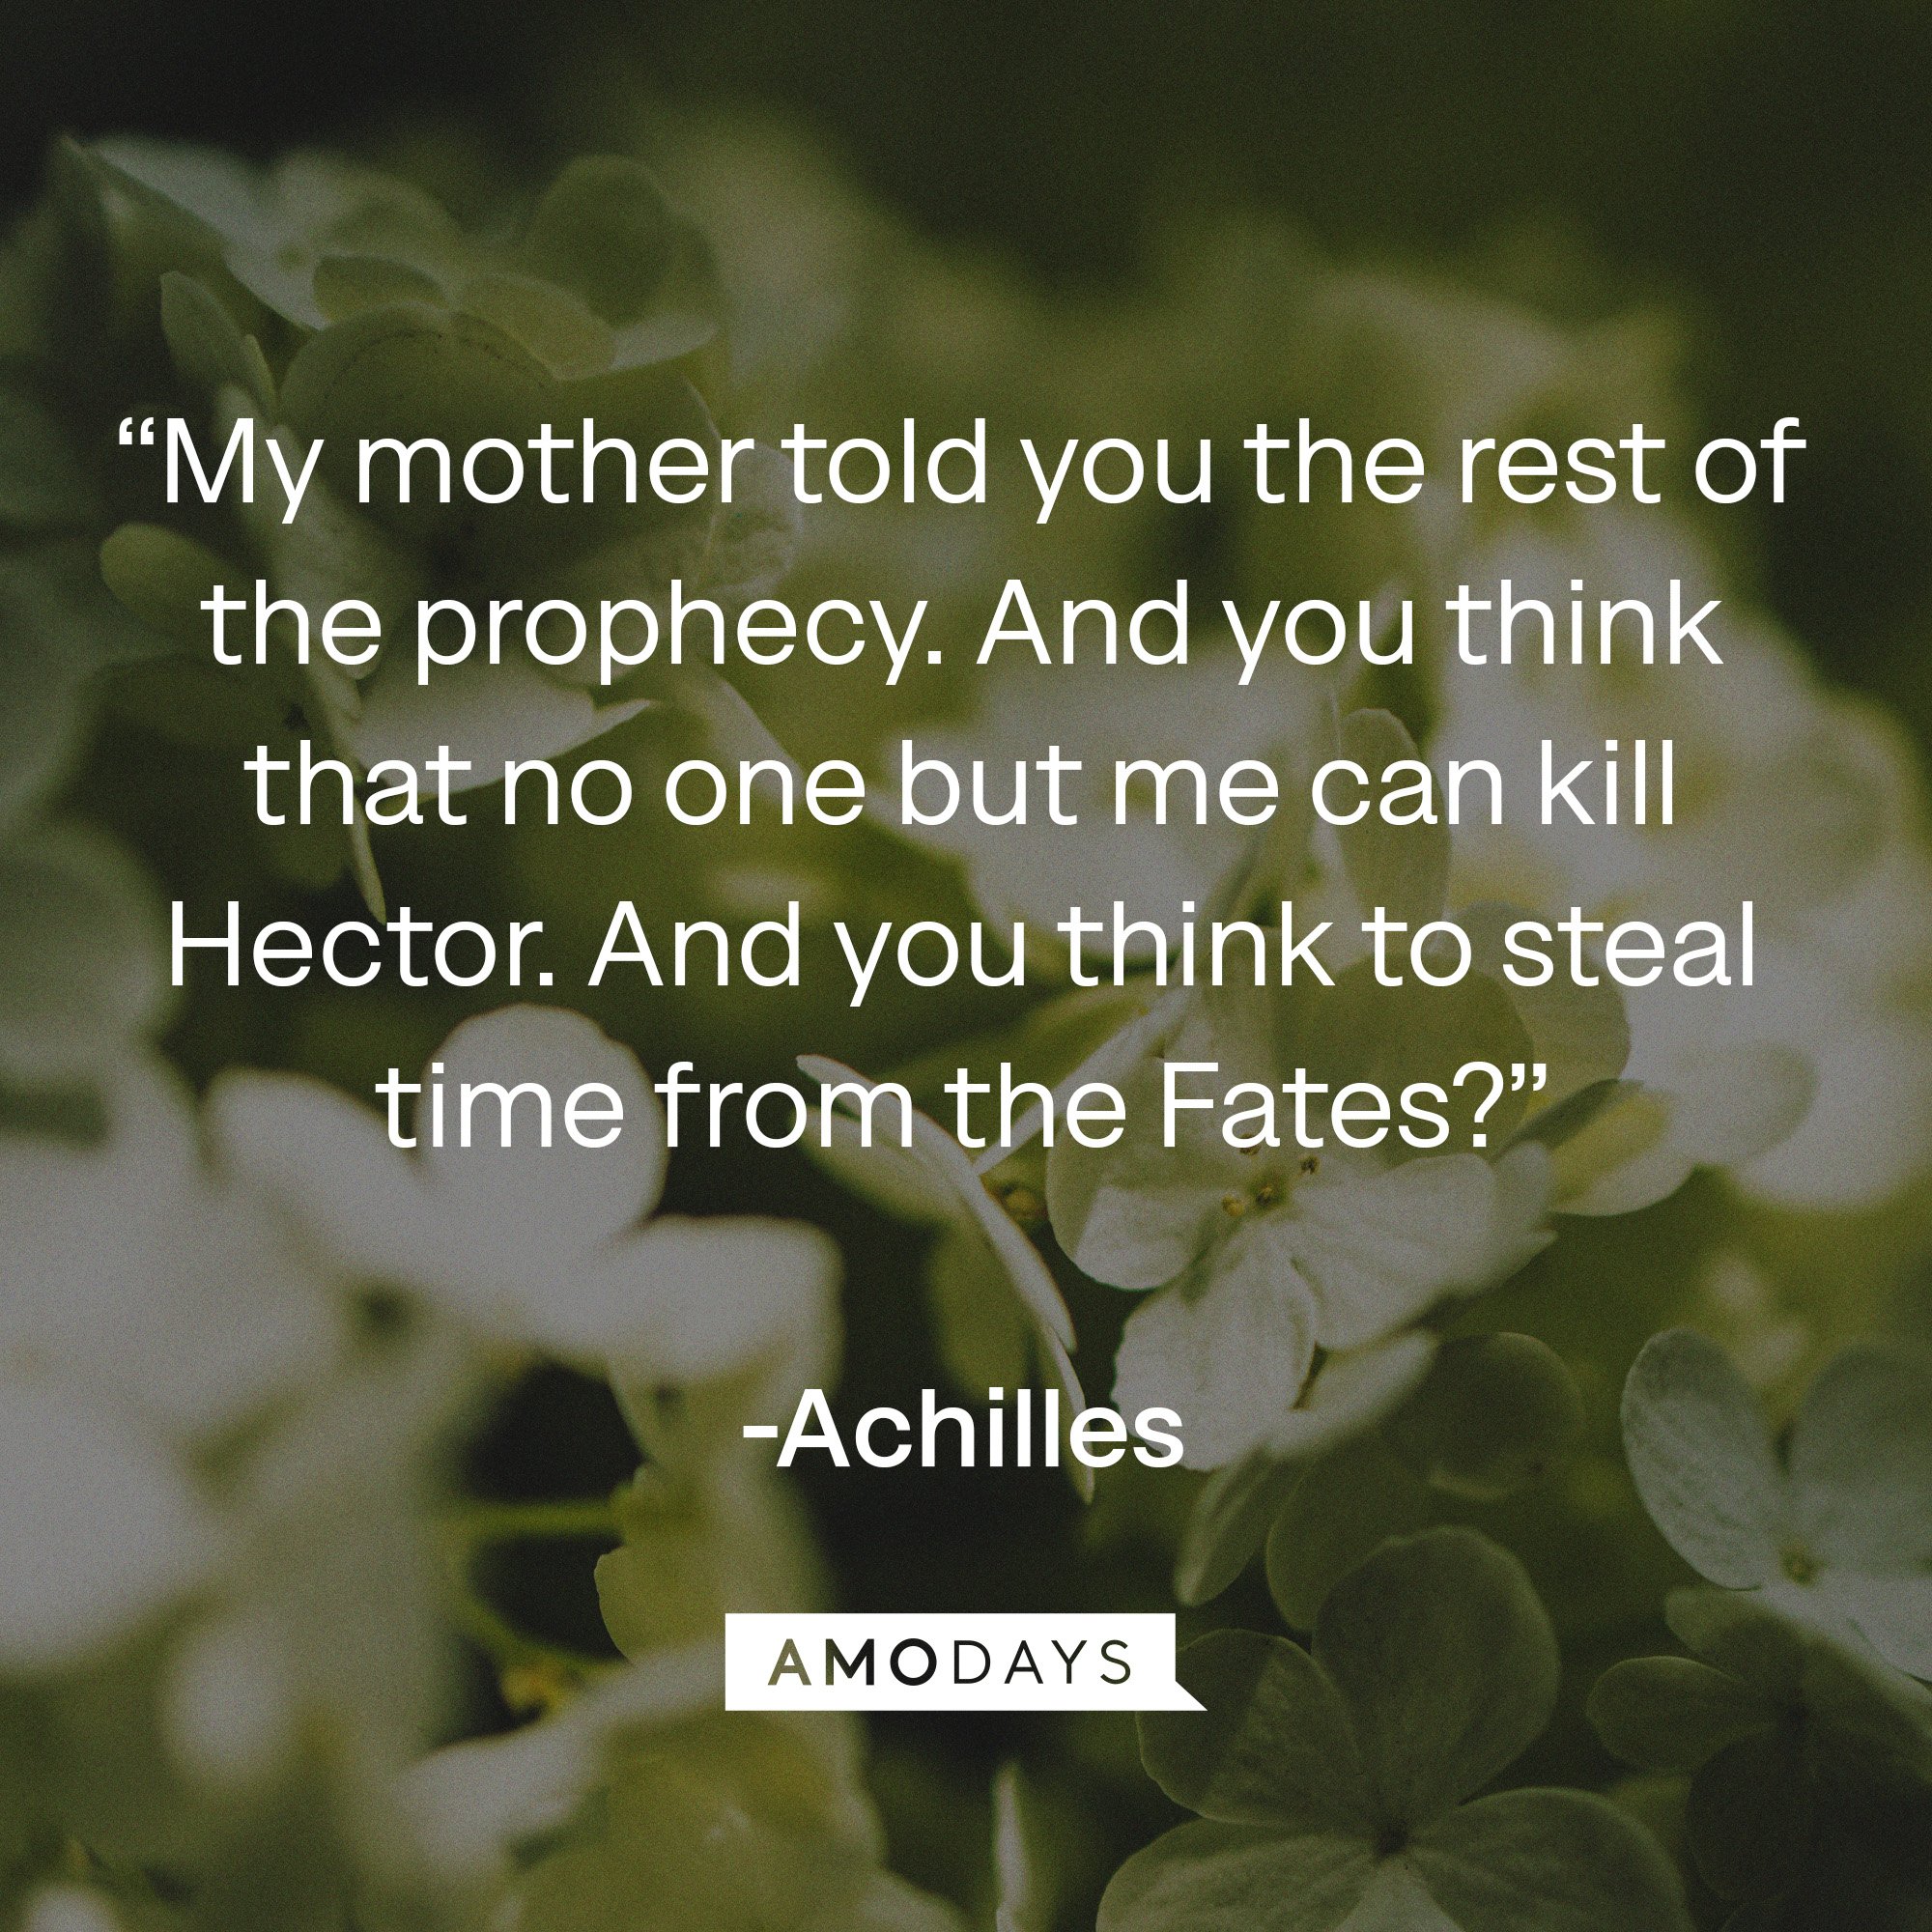 Achilles's quote: “My mother told you the rest of the prophecy. And you think that no one but me can kill Hector. And you think to steal time from the Fates?” | Image: AmoDays